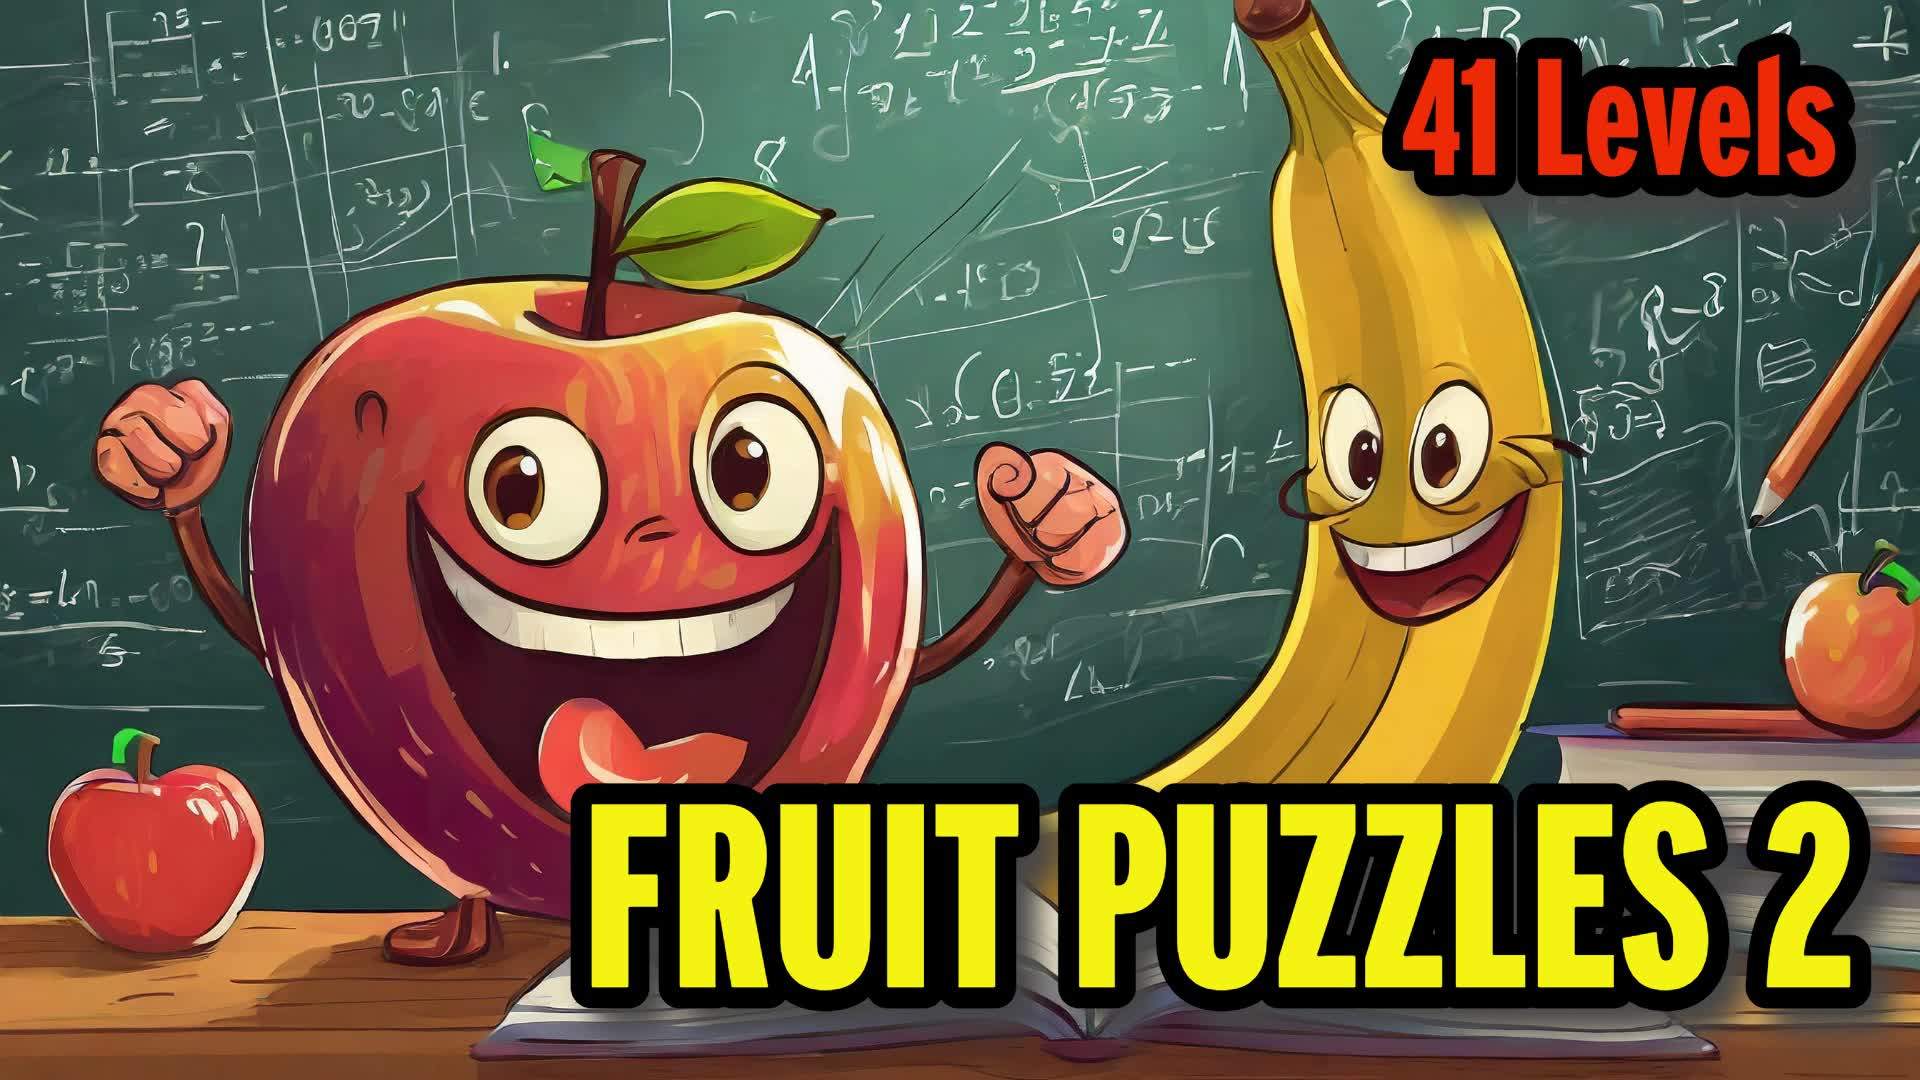 Fruit puzzles 2 - The Ultimate Brainbox